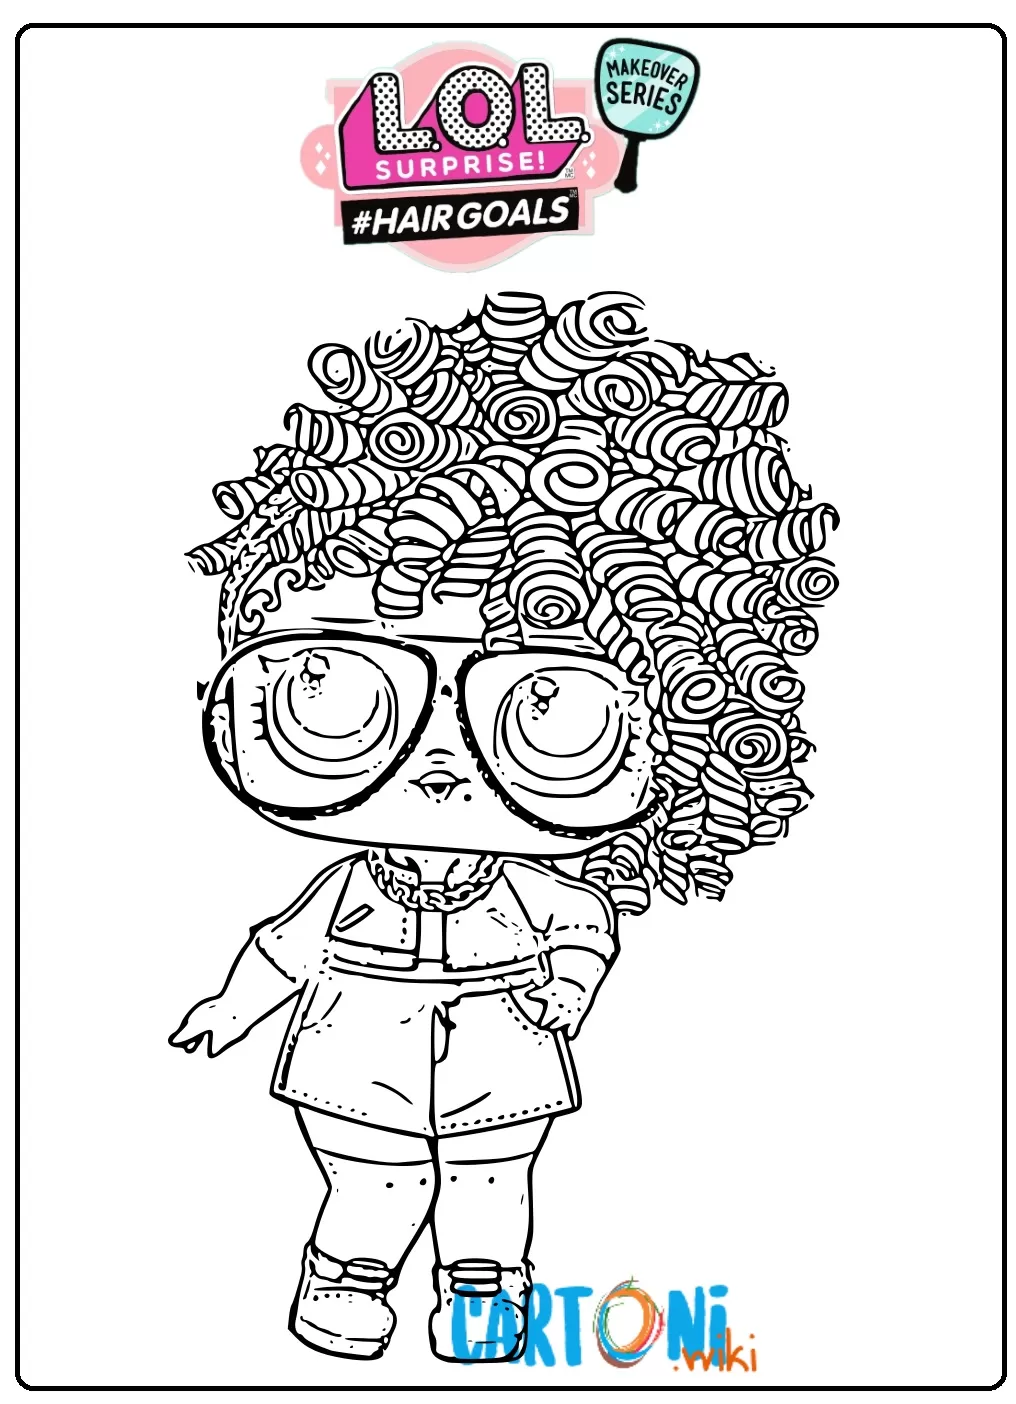 N.C. Nyc Lol Surprise hair goals coloring pages